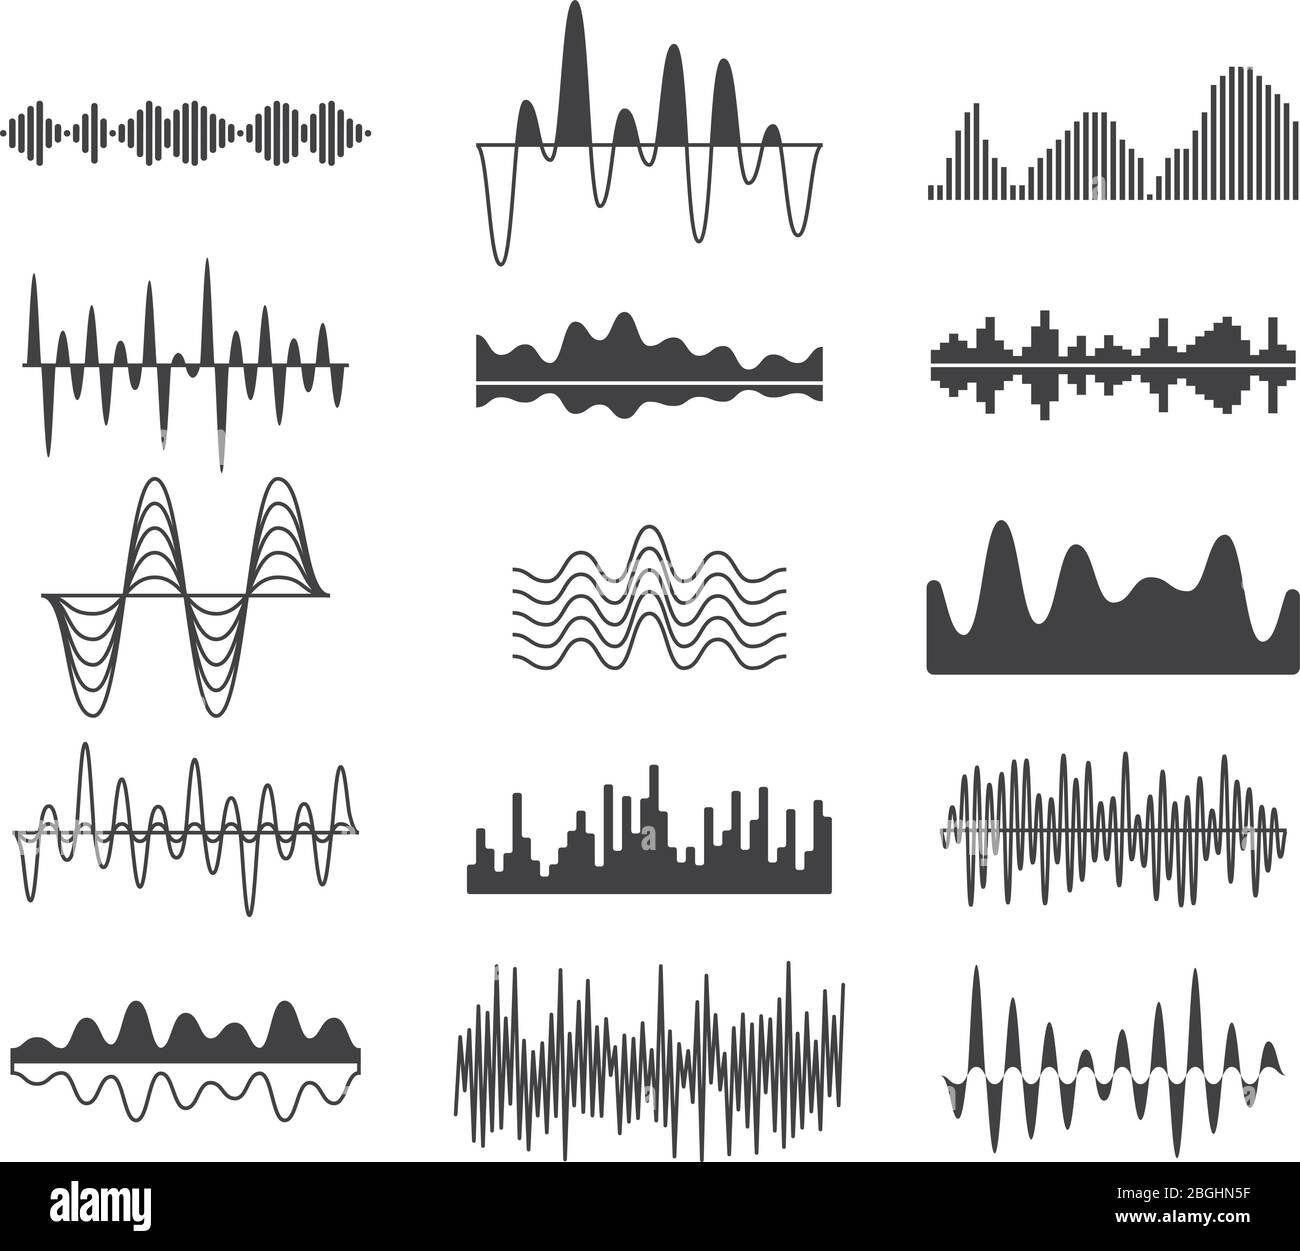 Sound frequency waves. Analog curved signal symbols. Audio track music equalizer forms, soundwaves signals vector set. Wavy signal electronic equalizer illustration Stock Vector